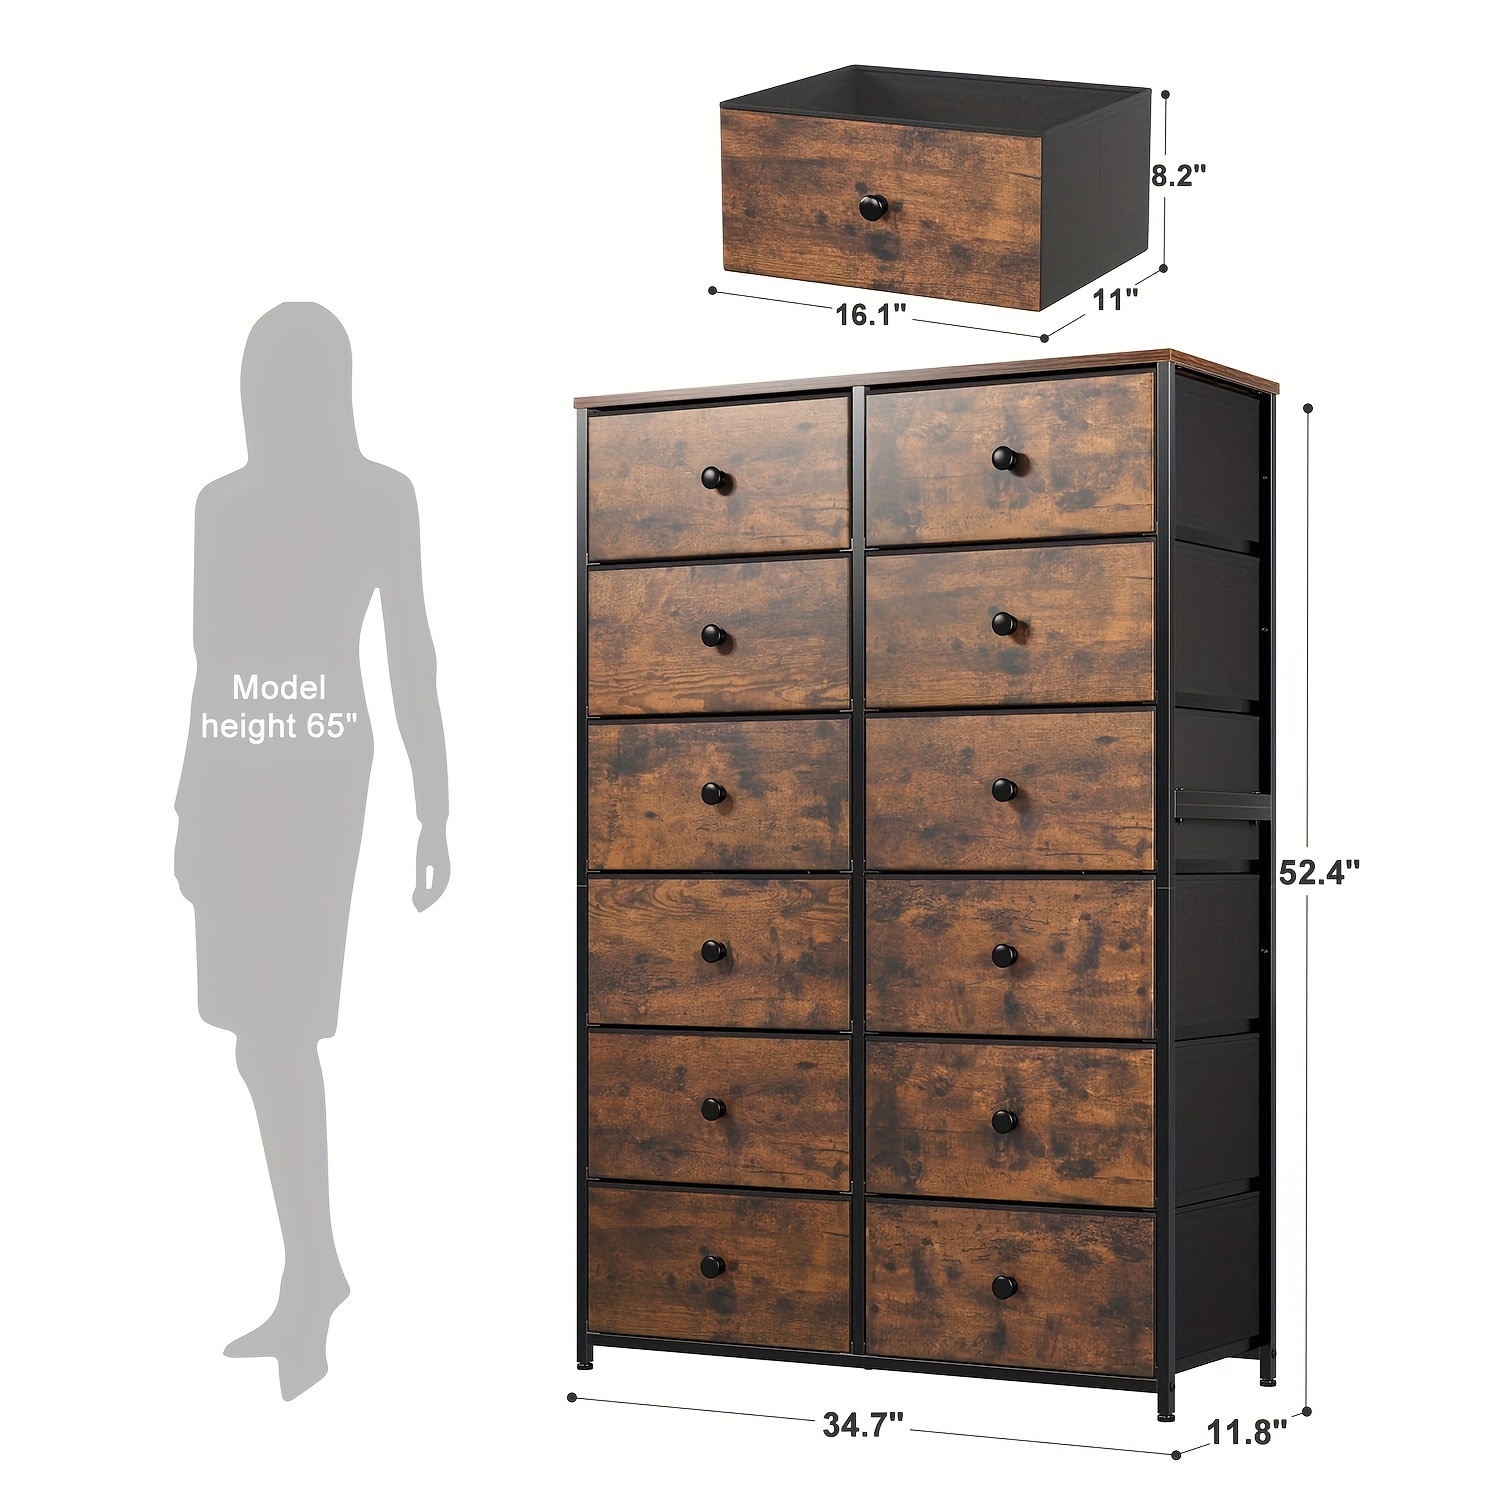 

Tall Dresser, Dresser For Bedroom With 12 Drawers Tall Bedroom Dresser For Bedroom, Large Fabric Dresser With Wood Top, Metal Frame For Closets, Living Room, Entryway, Rustic Brown